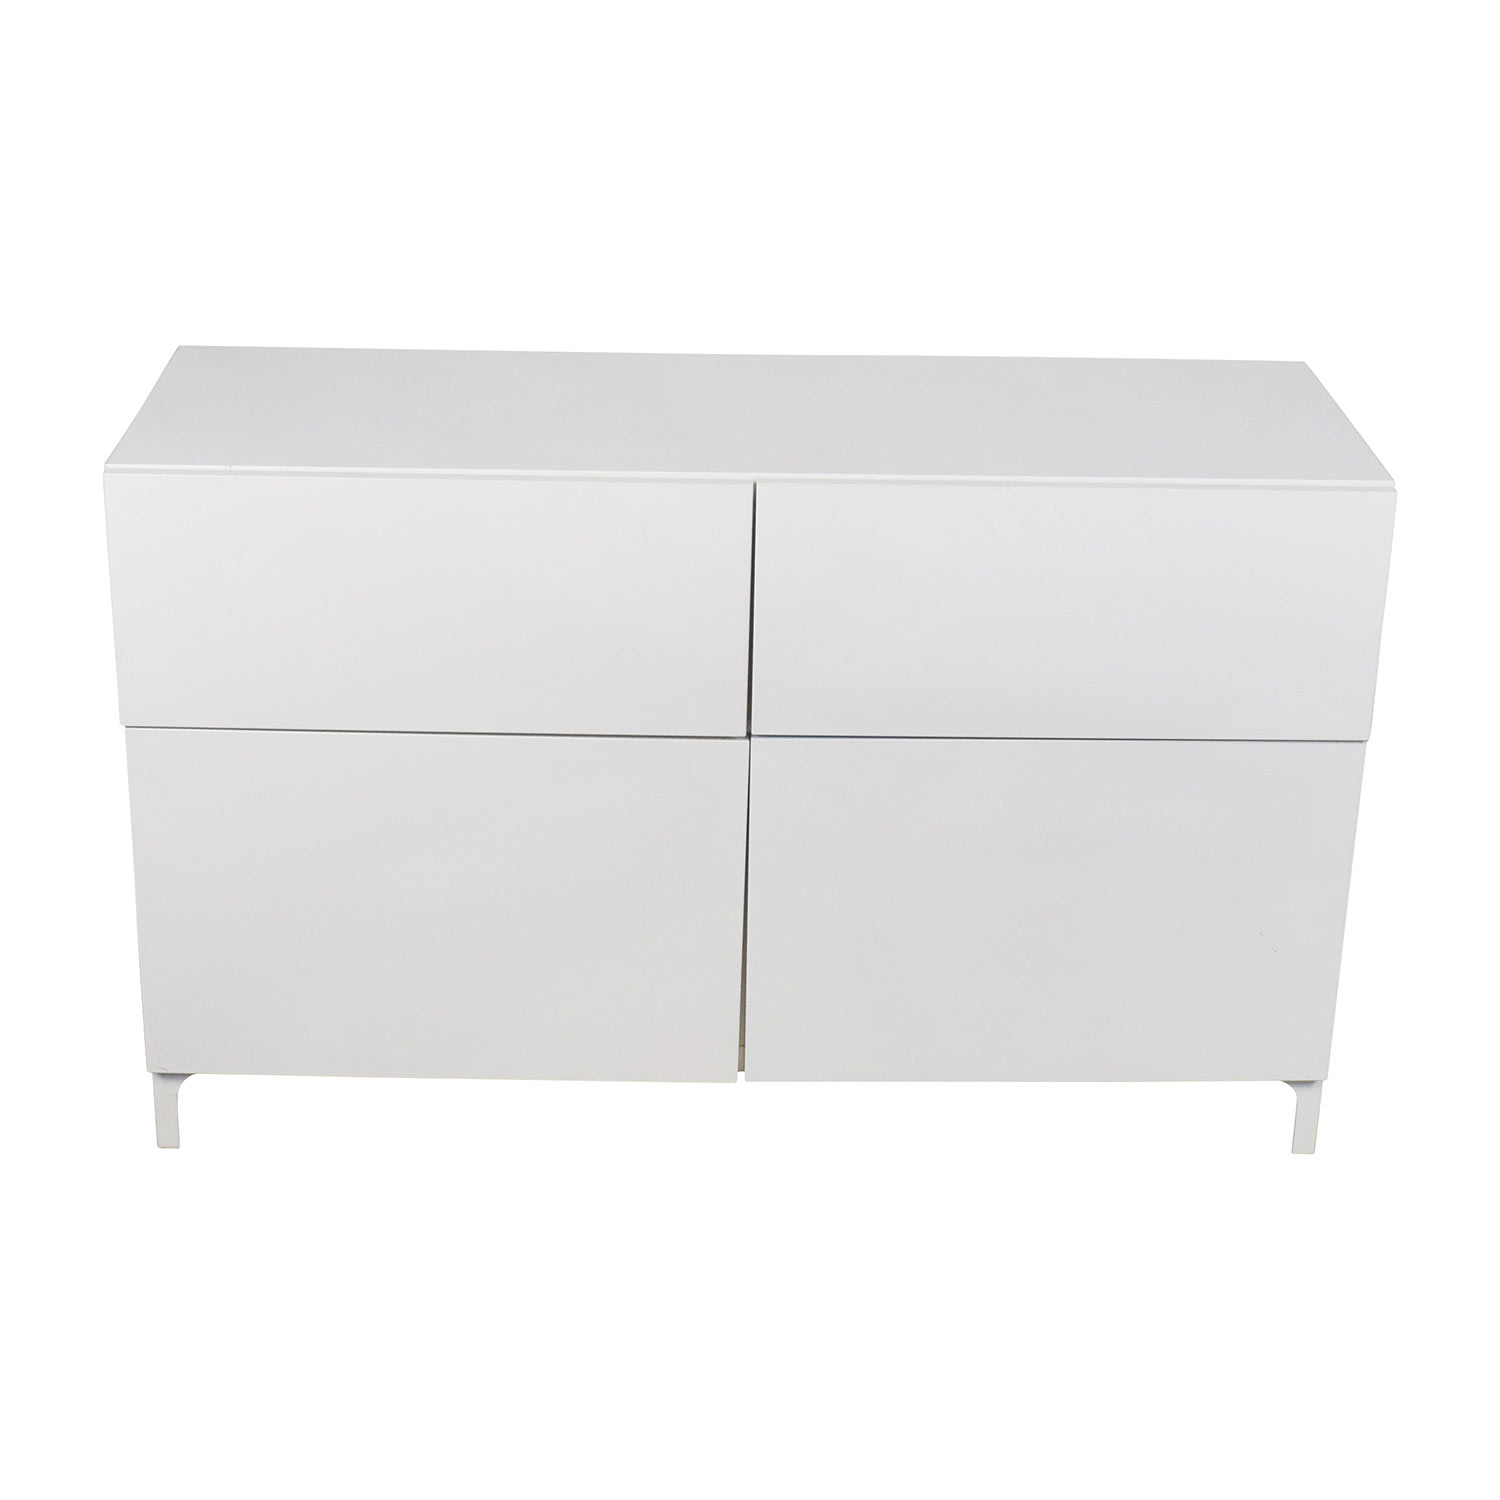 https://res.cloudinary.com/dkqtxtobb/image/upload/f_auto,q_auto:best,w_1500/product-assets/20735/ikea/storage/cabinets-sideboards/ikea-besta-white-cabinet-used.jpeg